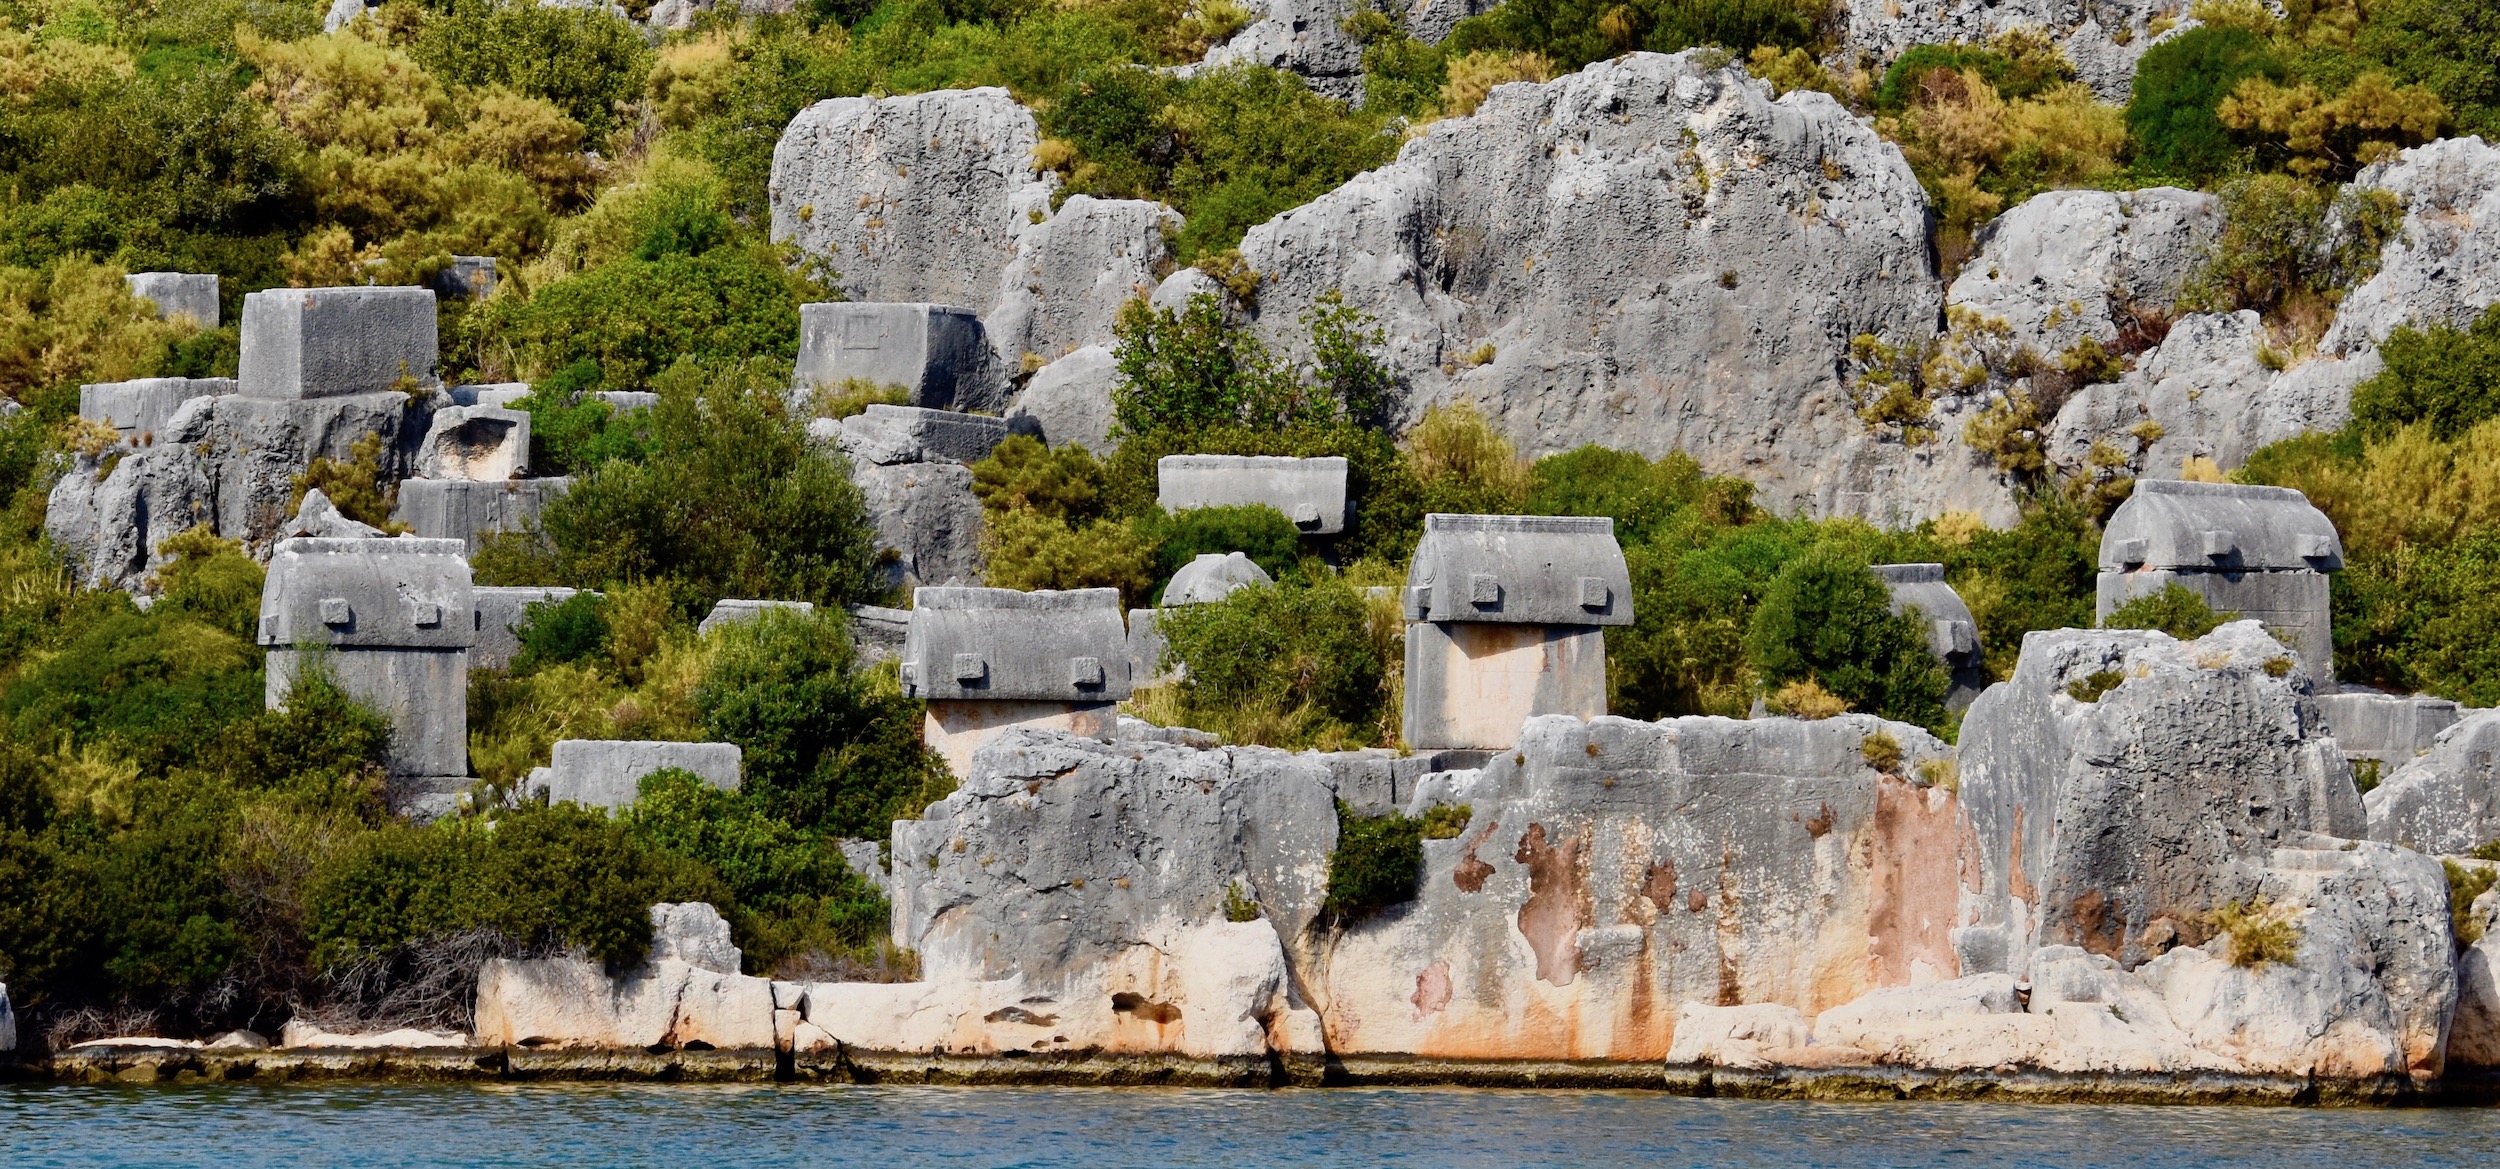 Waterfront Lycian Tombs, the Turquoise Coast